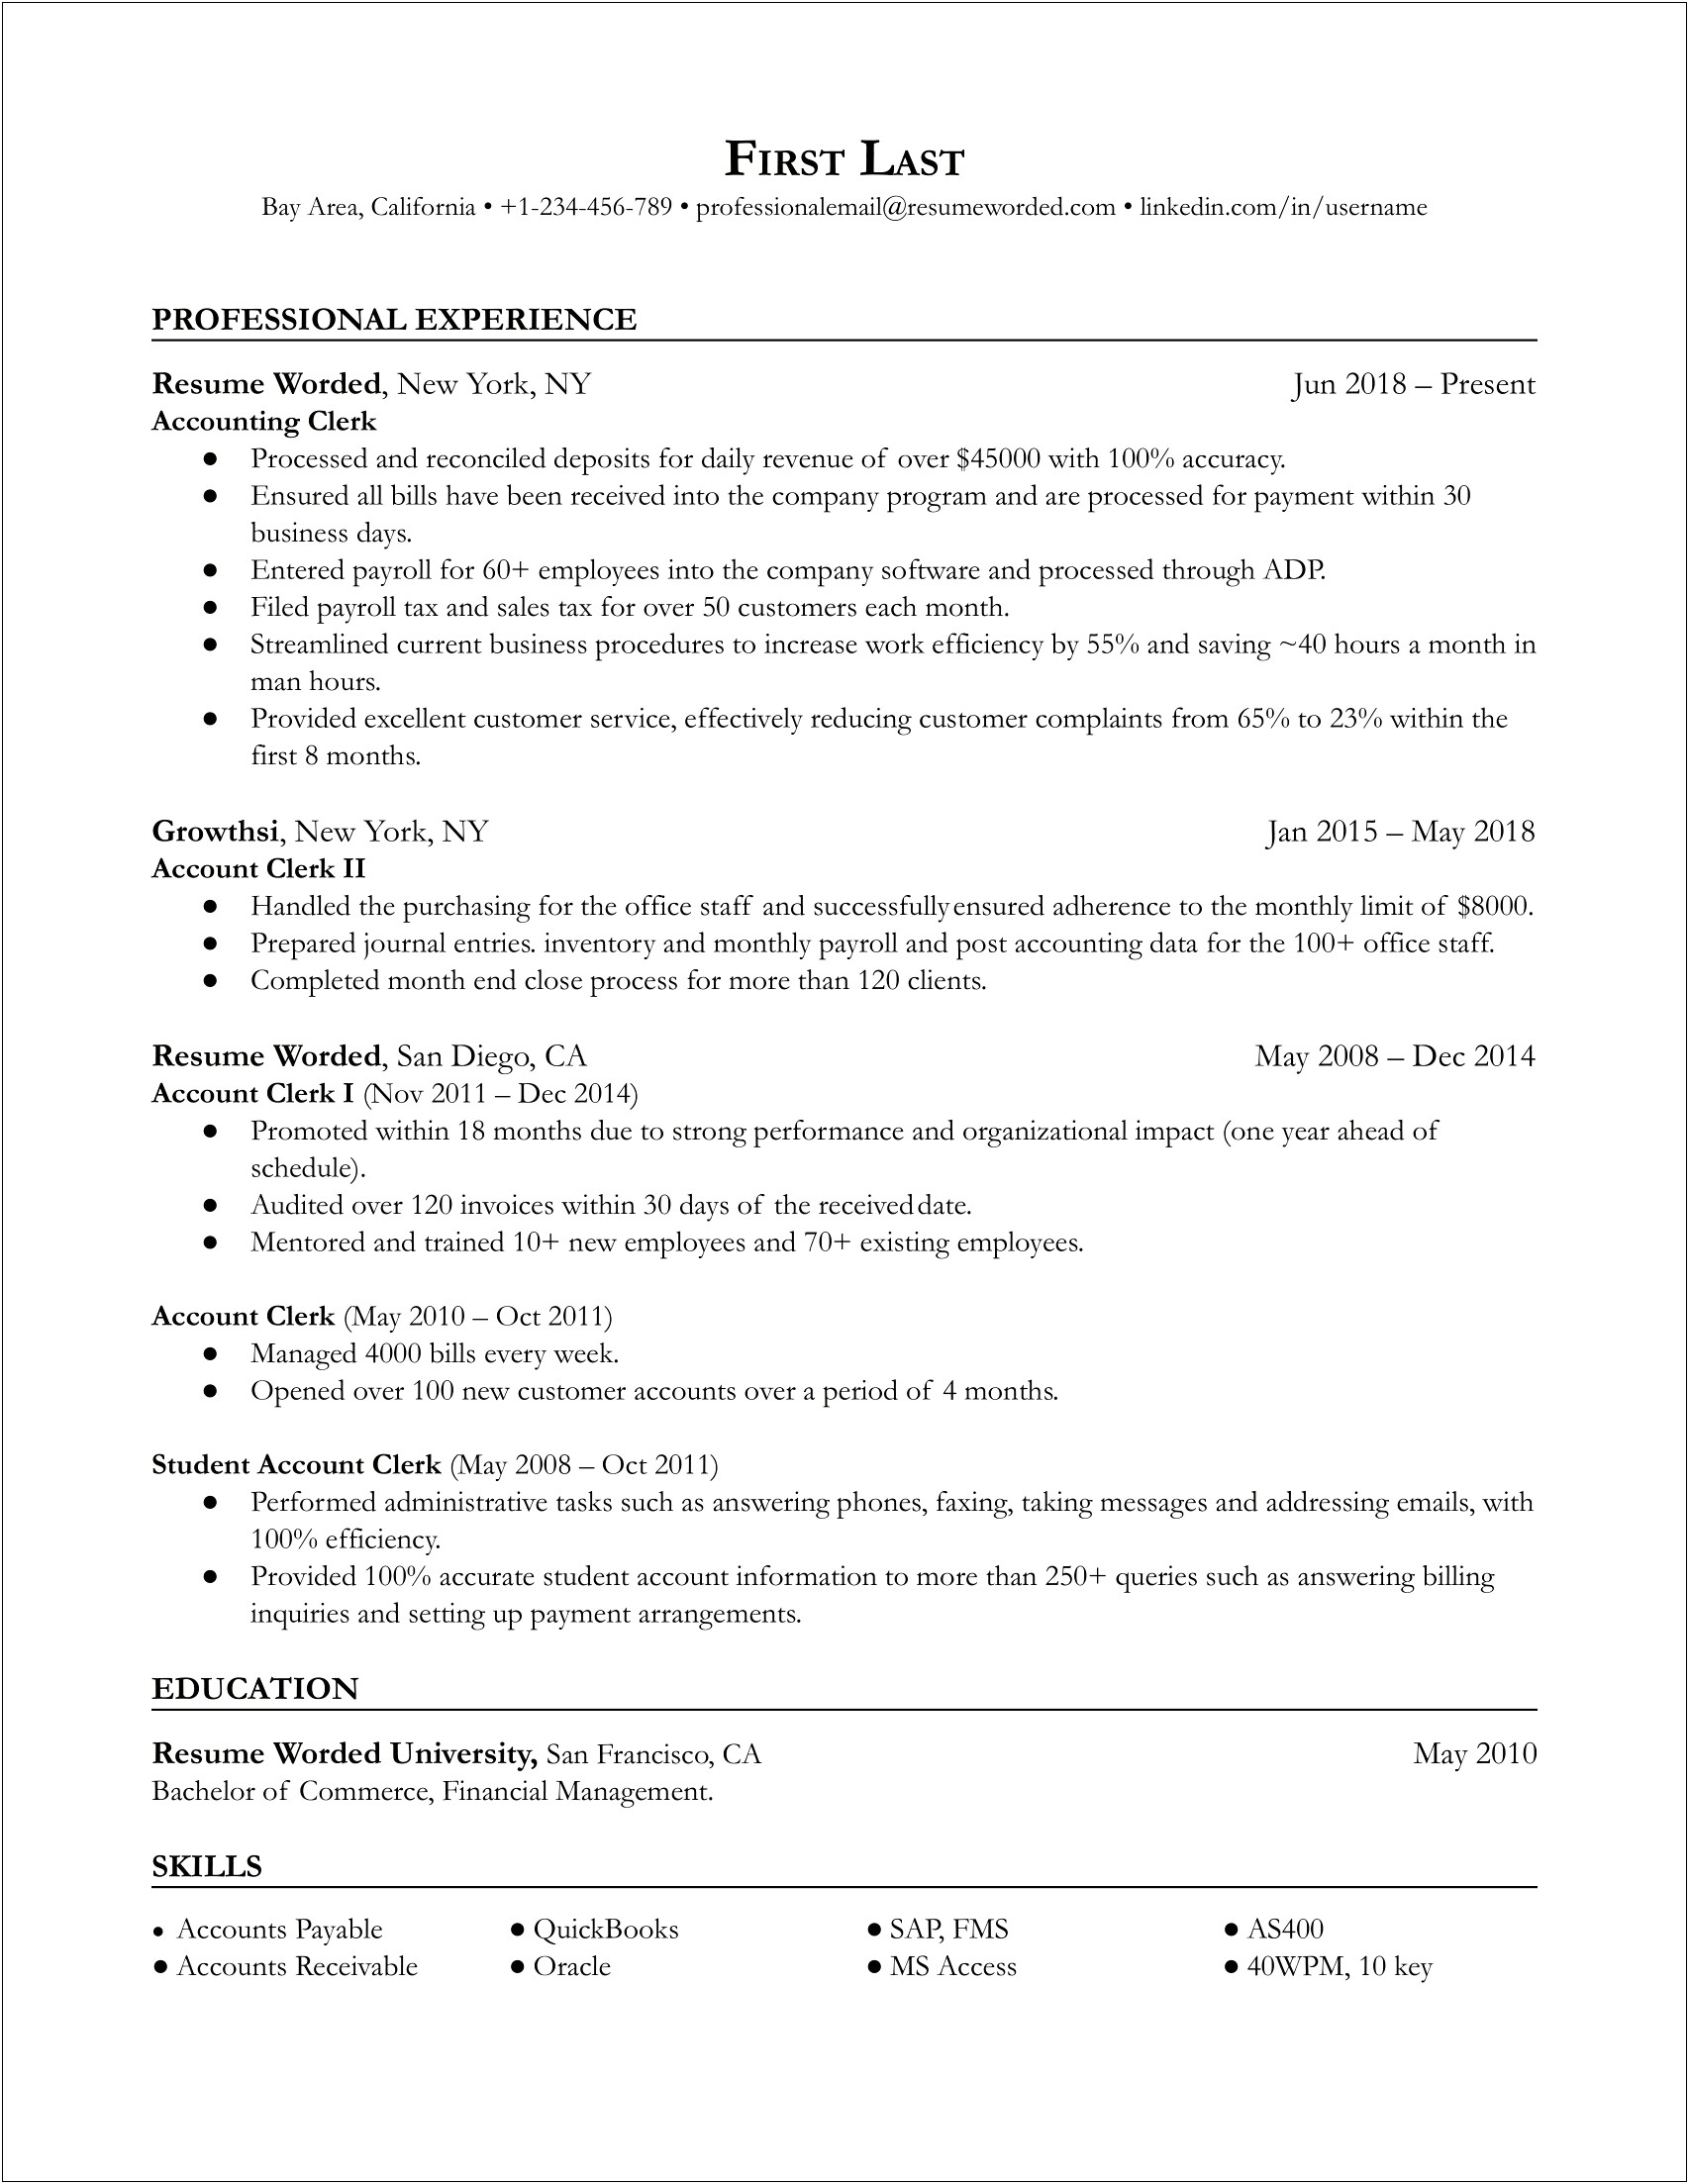 Sample Resume For Accounting Job With No Experience